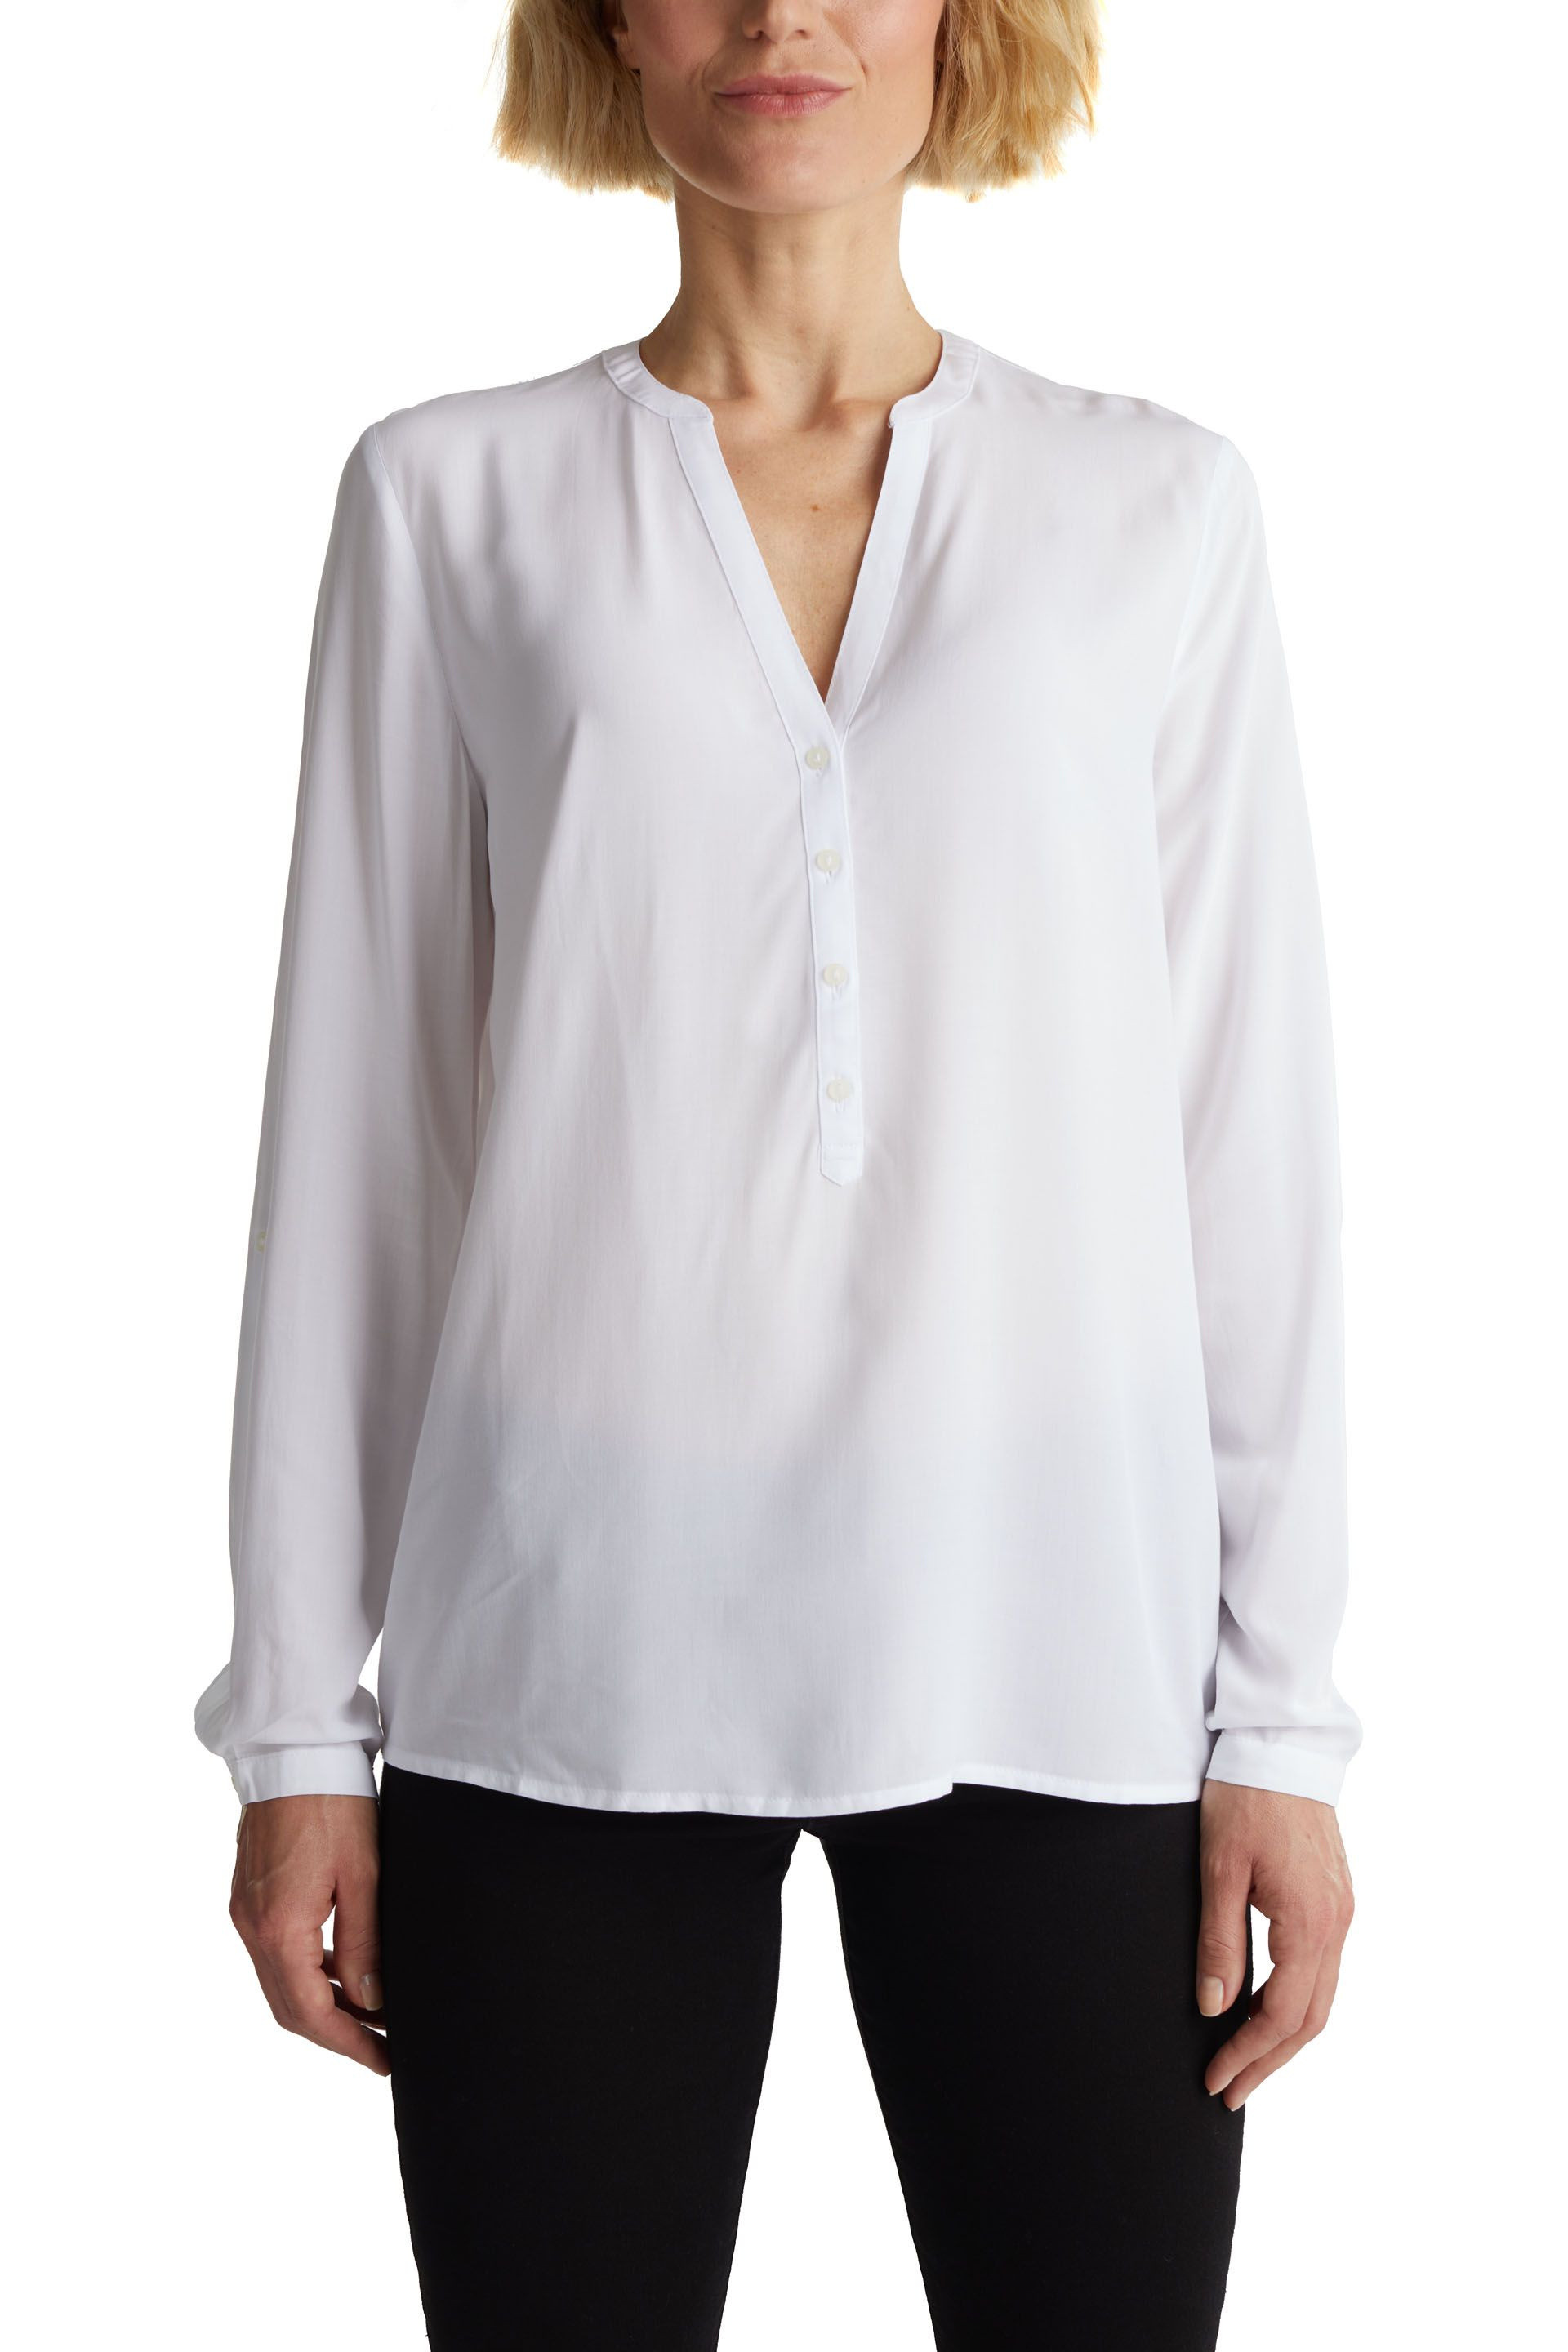 Blouse with adjustable sleeves, White, large image number 1